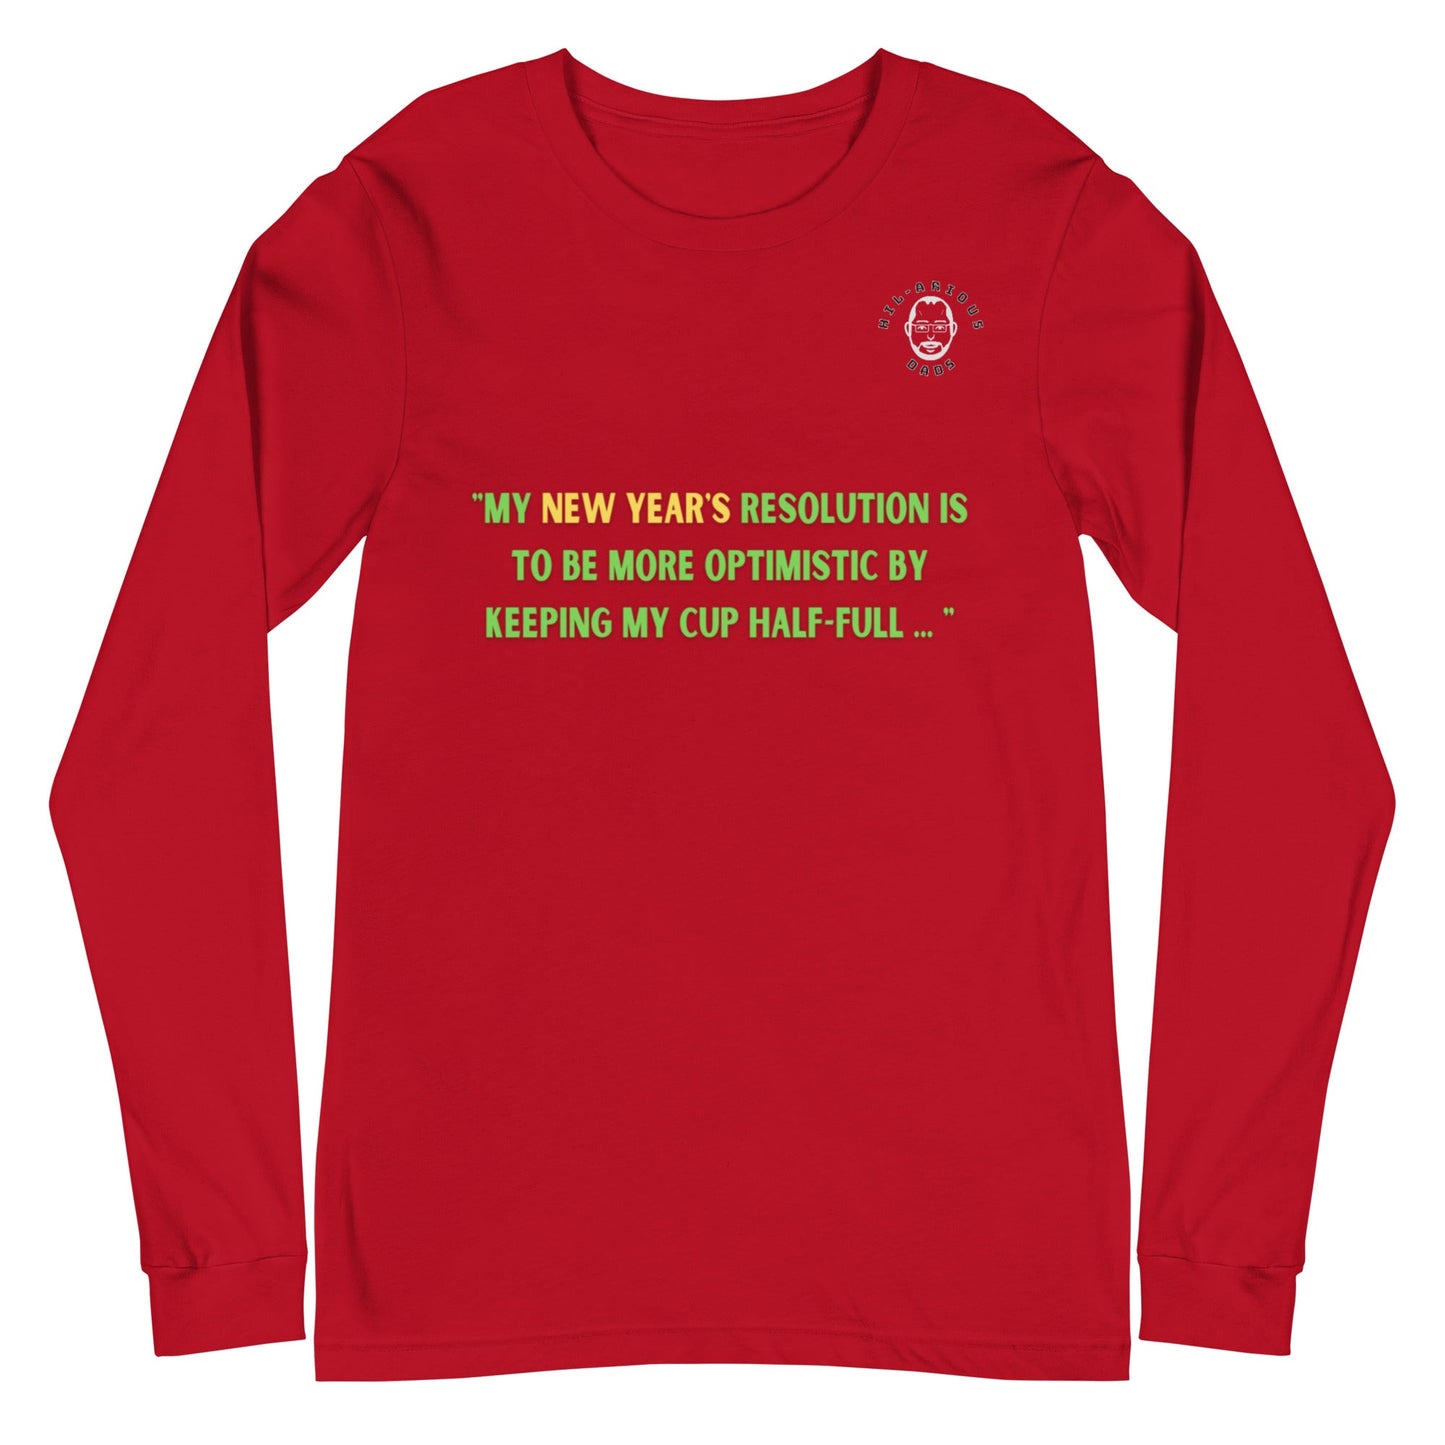 Rum, Vodka or Whiskey-Long Sleeve Tee - Hil-arious Dads